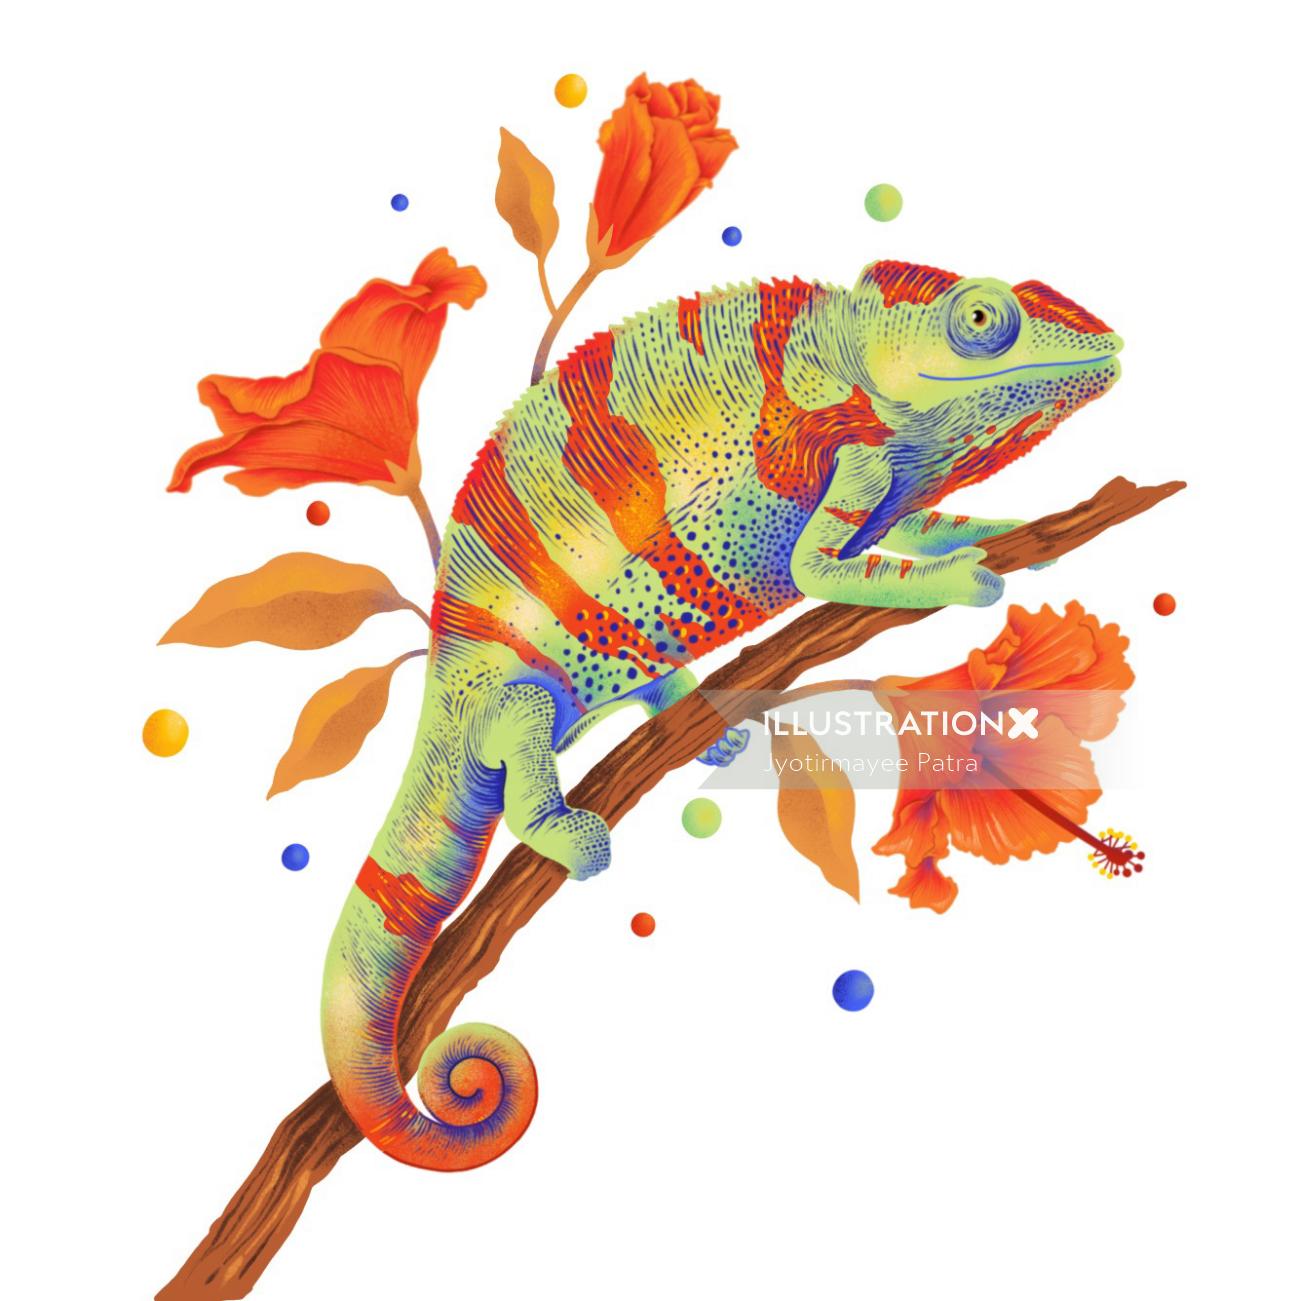 Chameleon illustration with vibrant colours & graphic textures